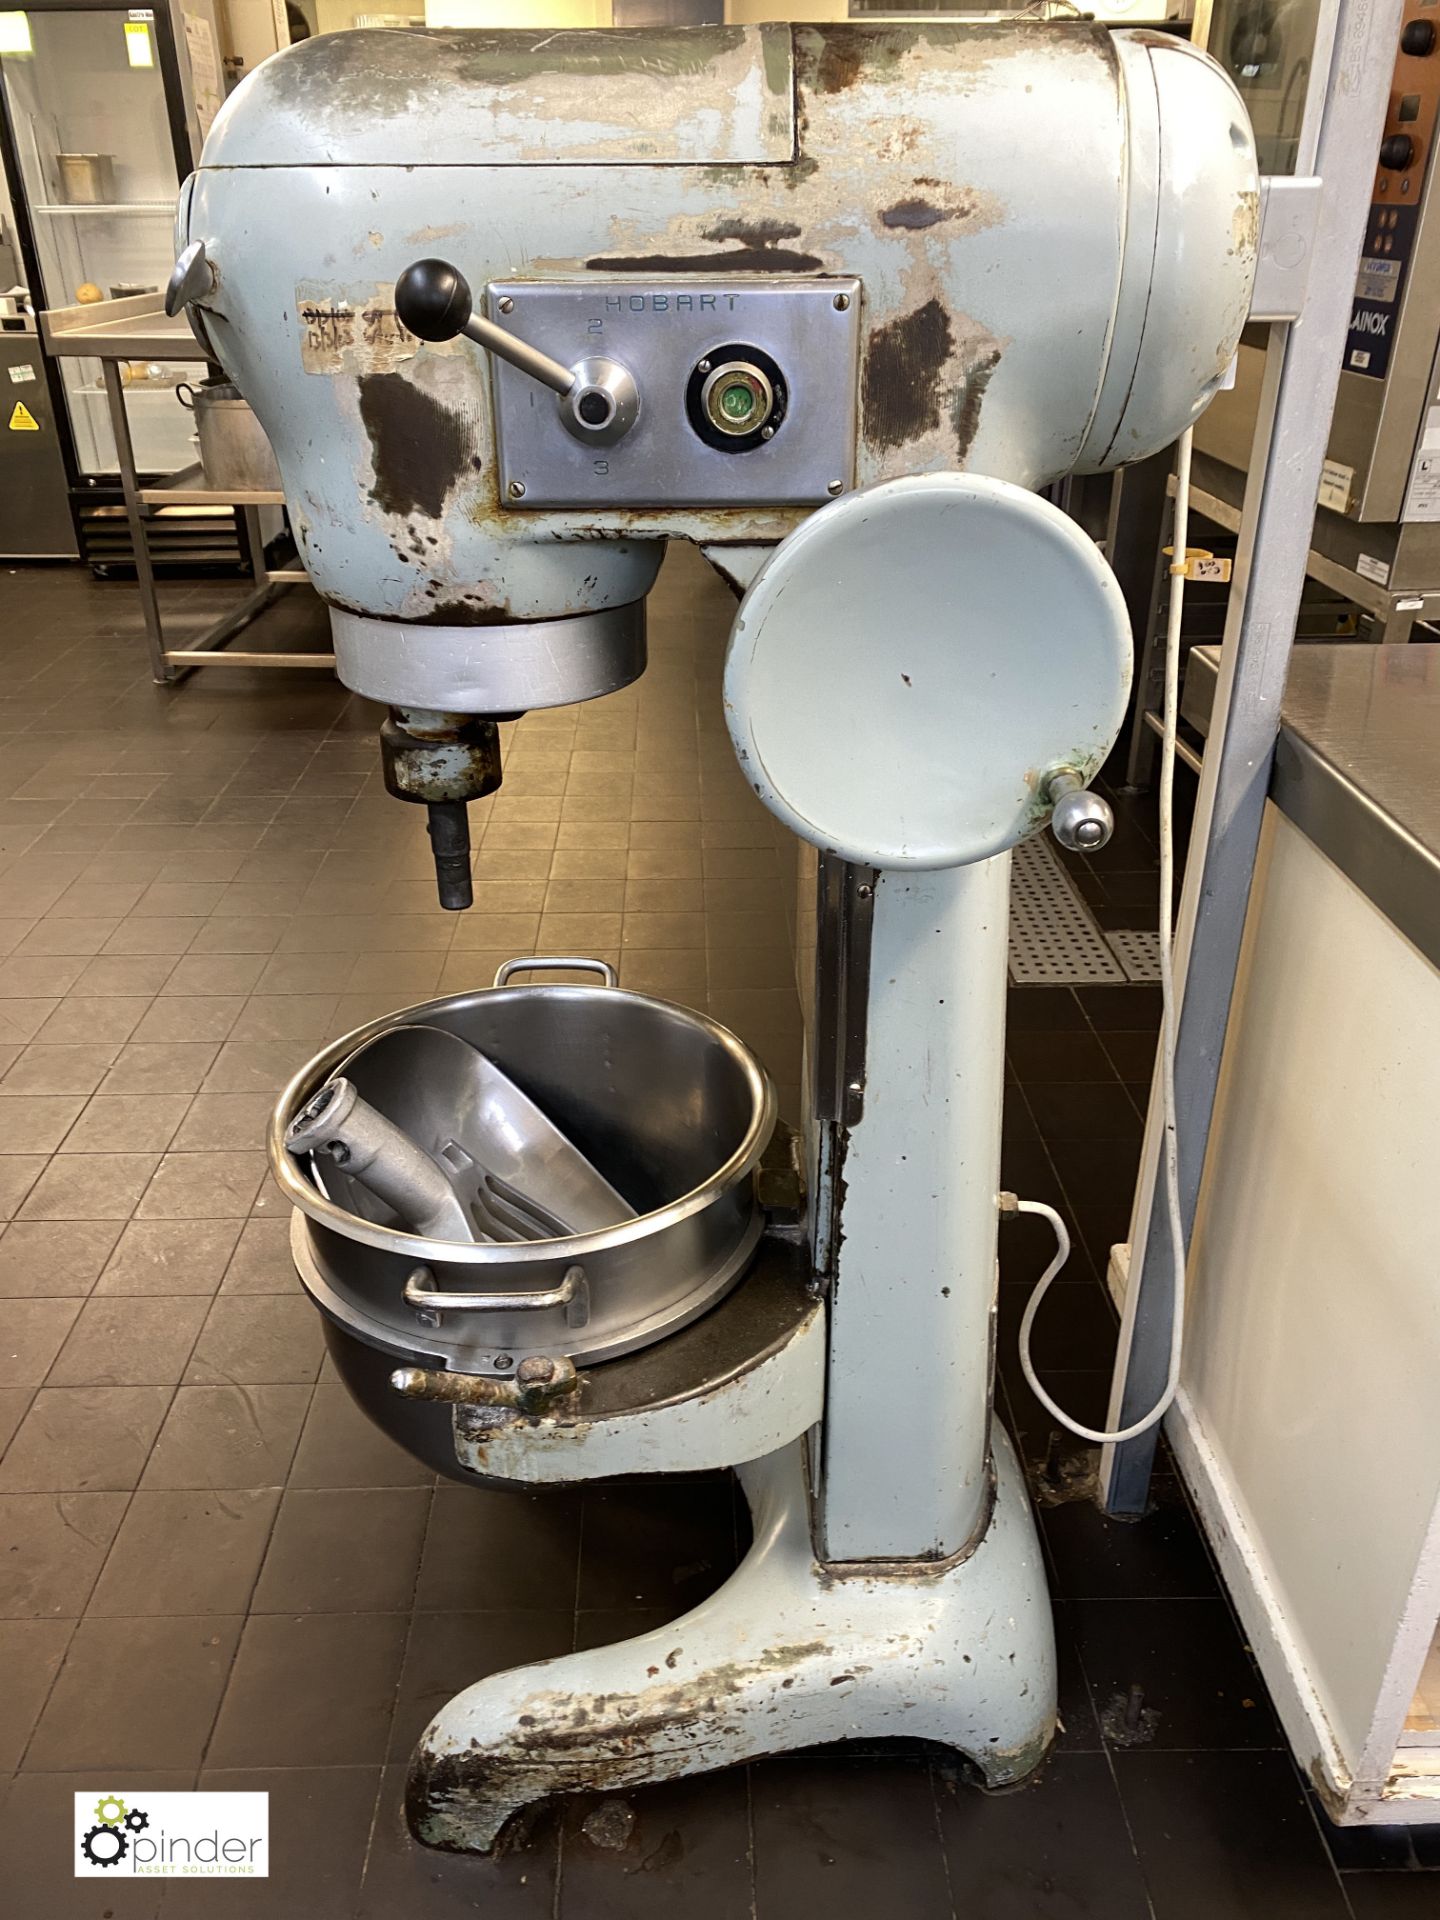 Hobart SE302 floor standing Planetary Food Mixer, 240volts, with bowl and mixing paddle (in Kitchen) - Image 3 of 5